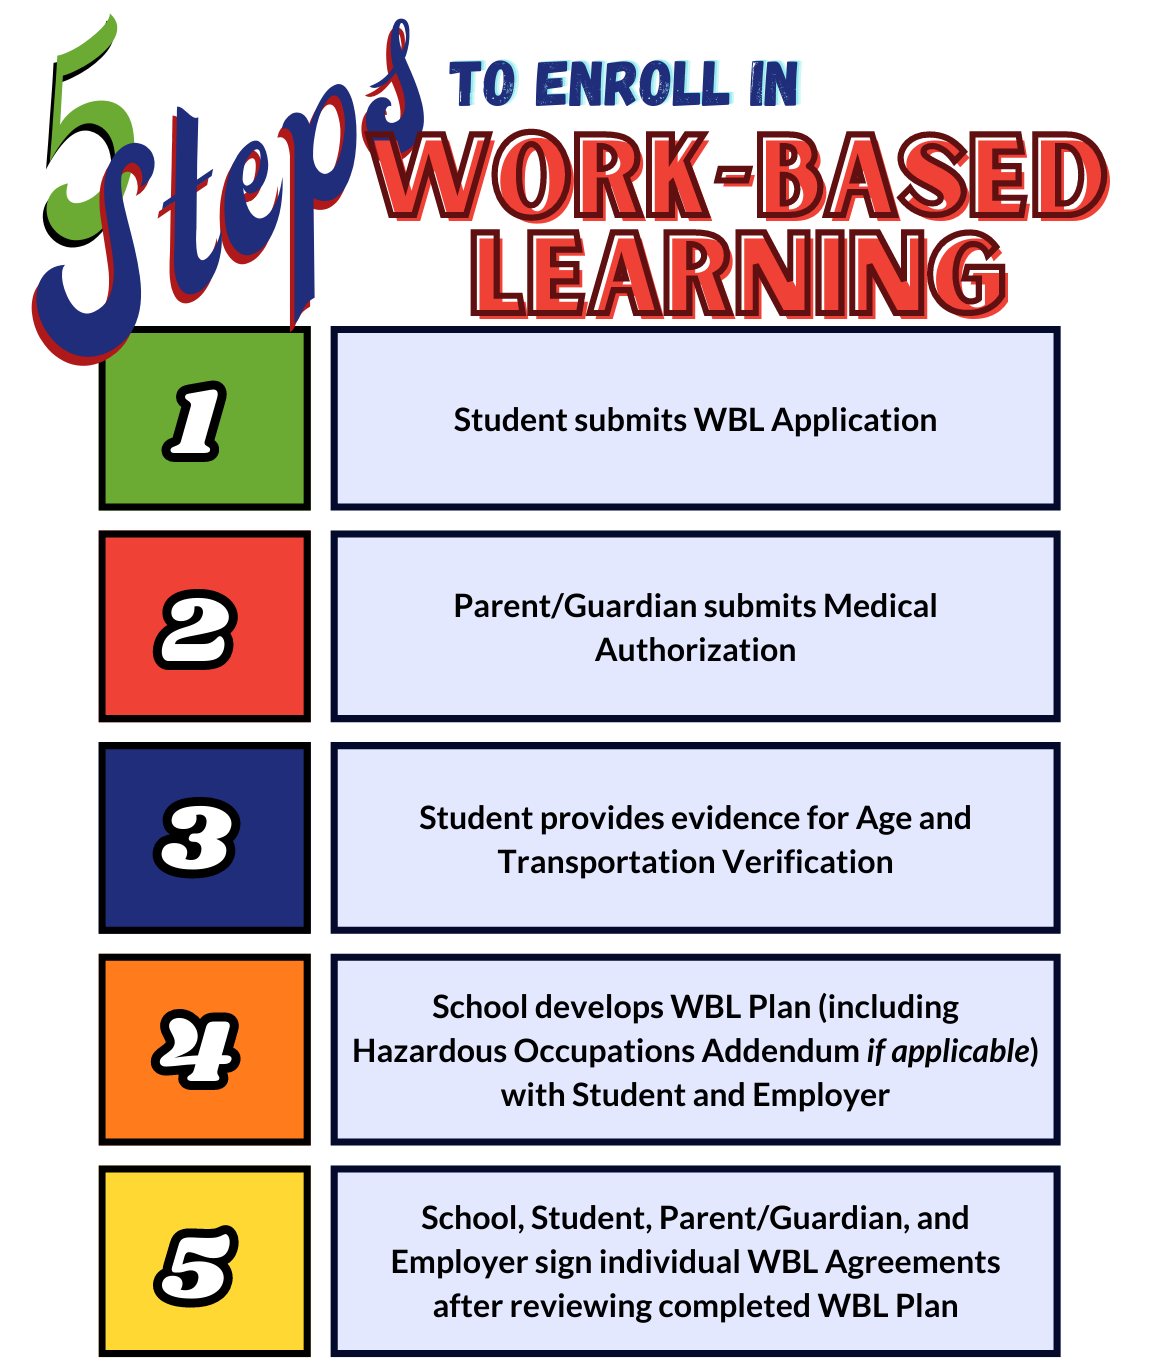 5 steps to enroll in work-based learning